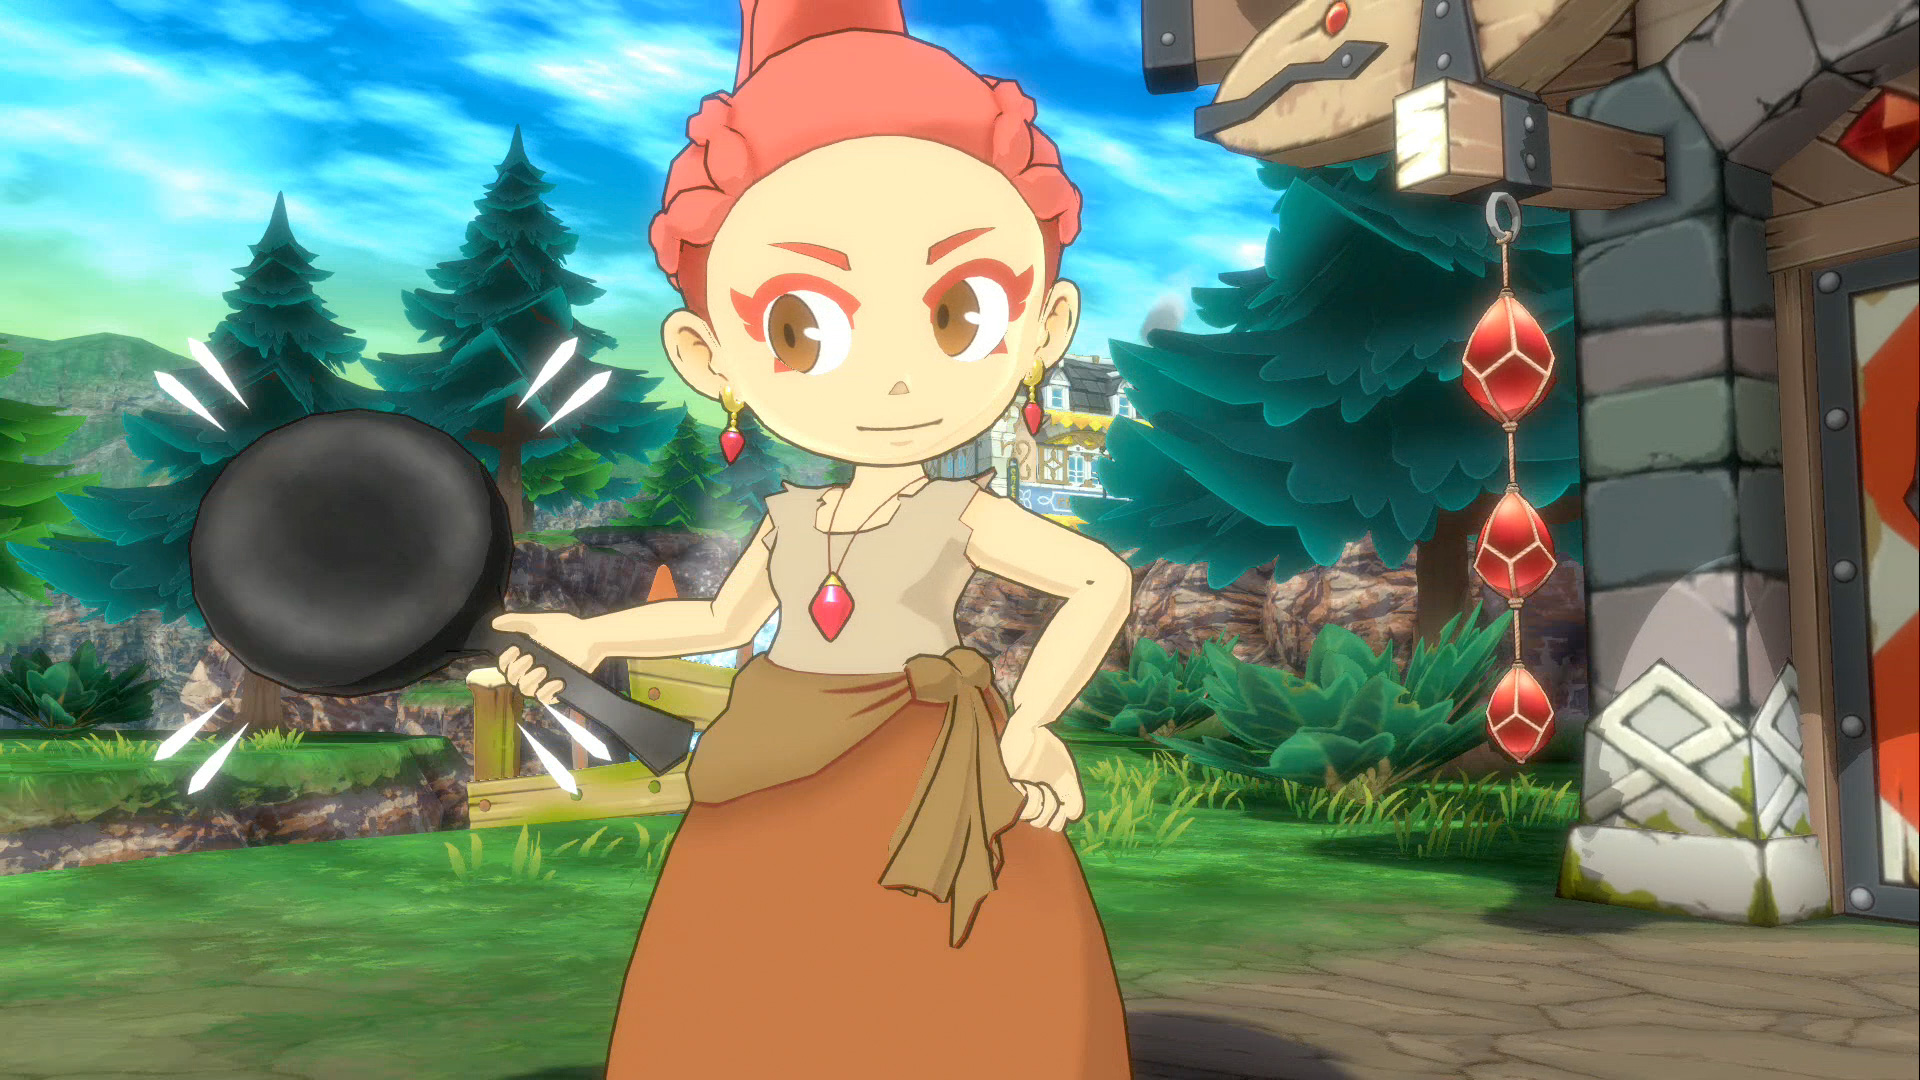 Game Freak RPG Officially Titled Little Town Hero, Launches